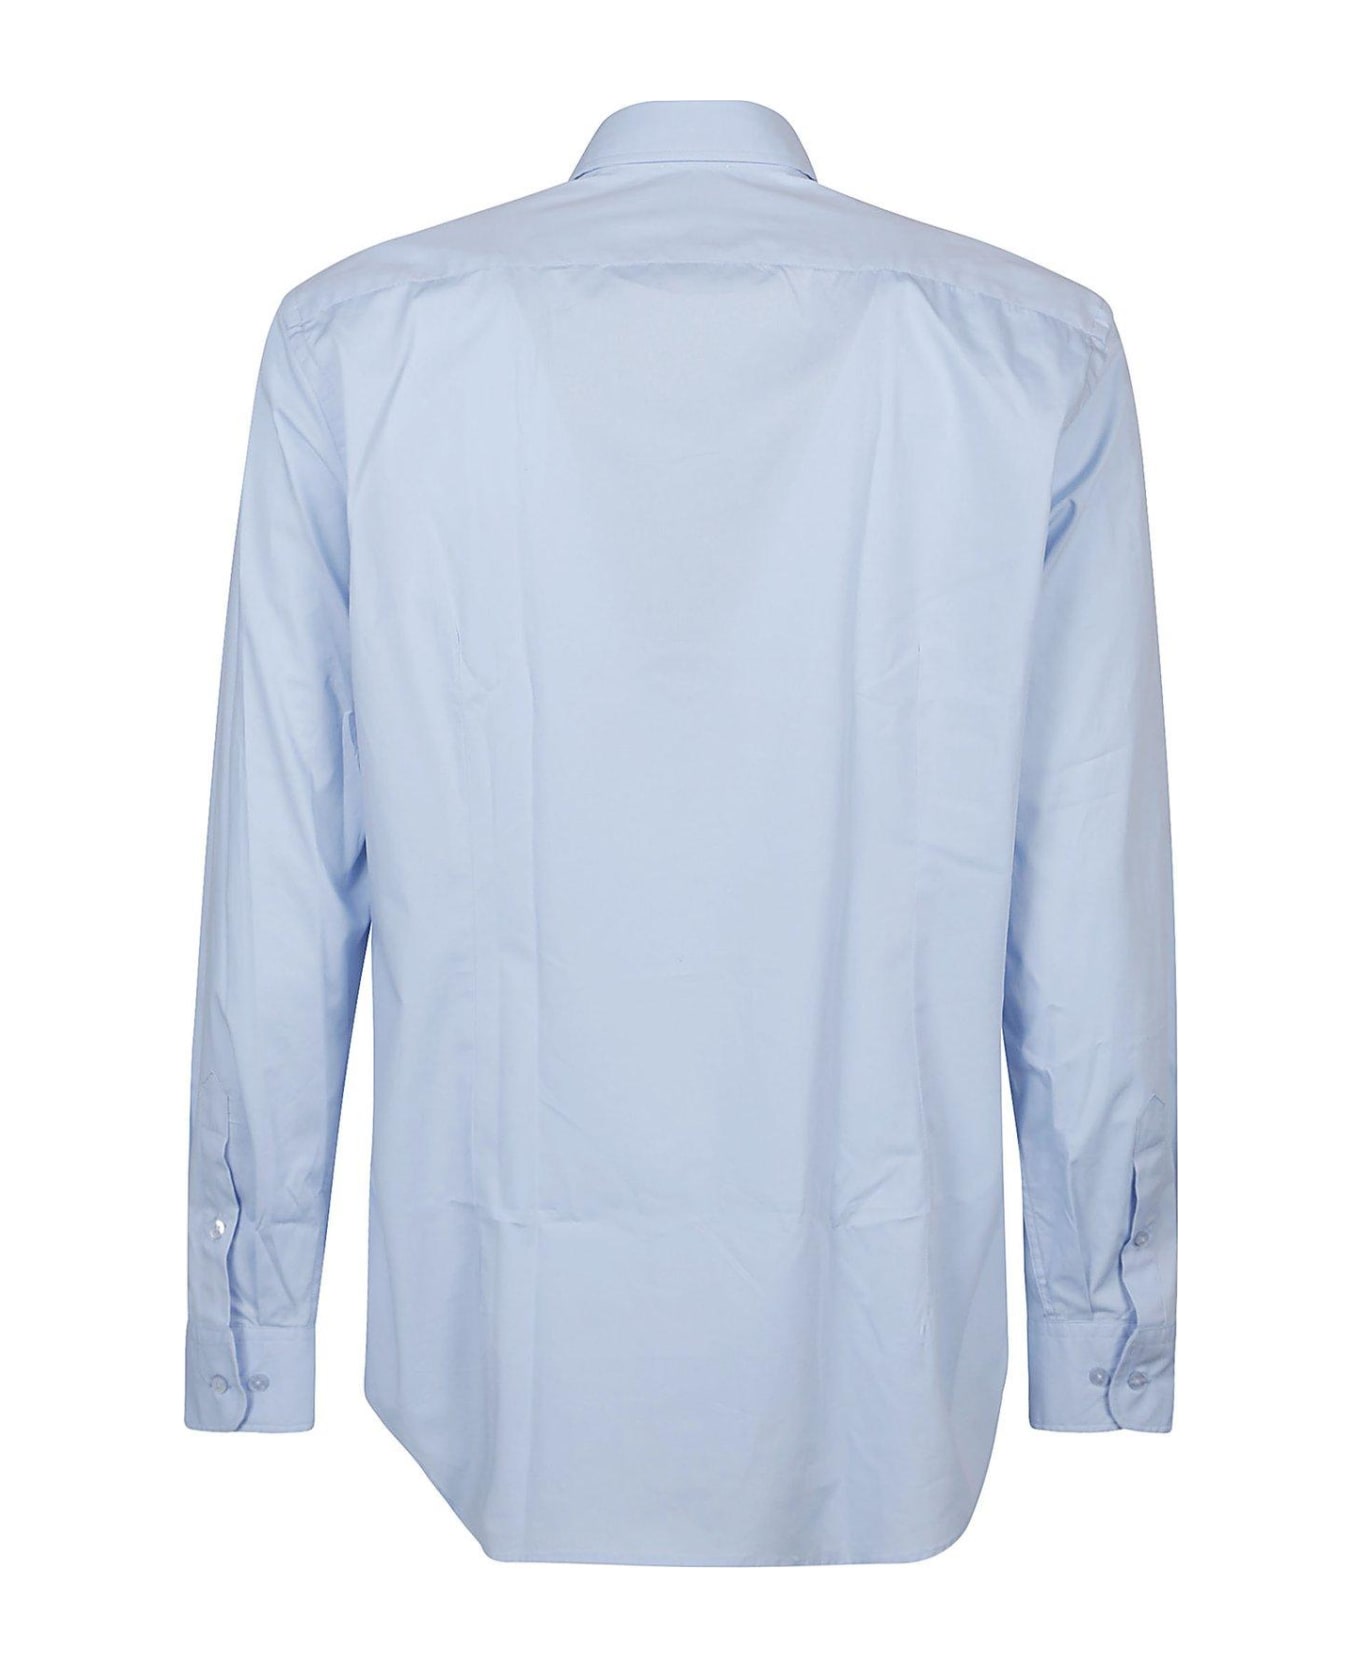 Etro Pegaso Embroidered Buttoned Shirt - Clear Blue シャツ